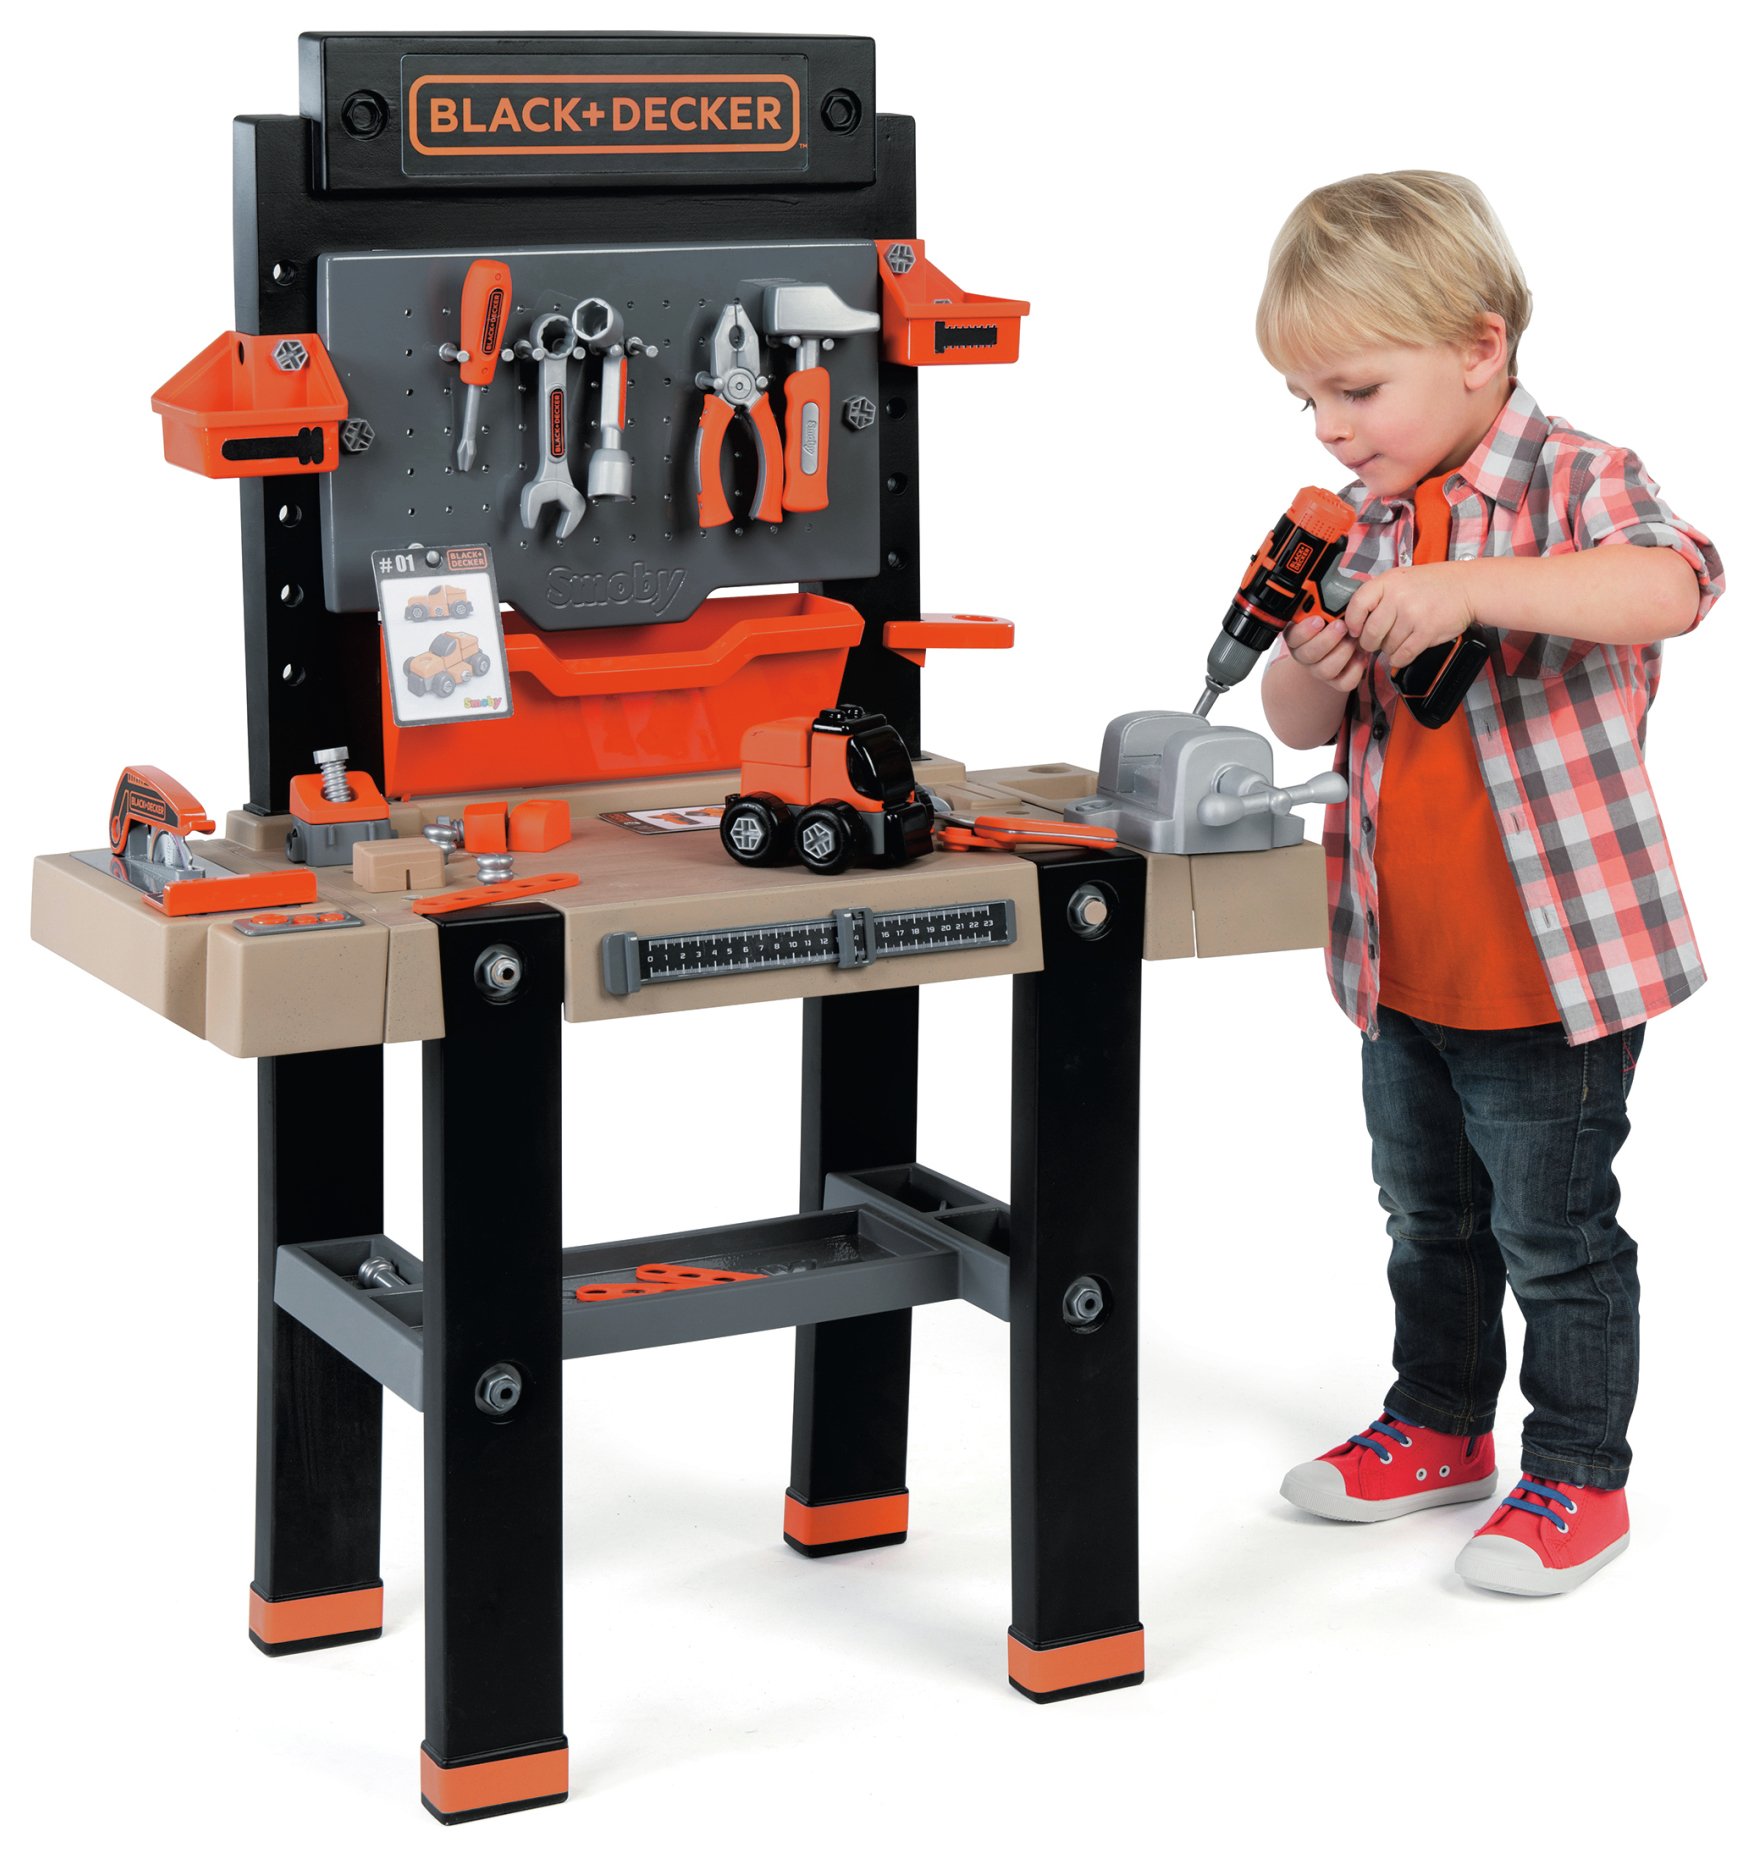 Smoby Black and Decker The Ultimate